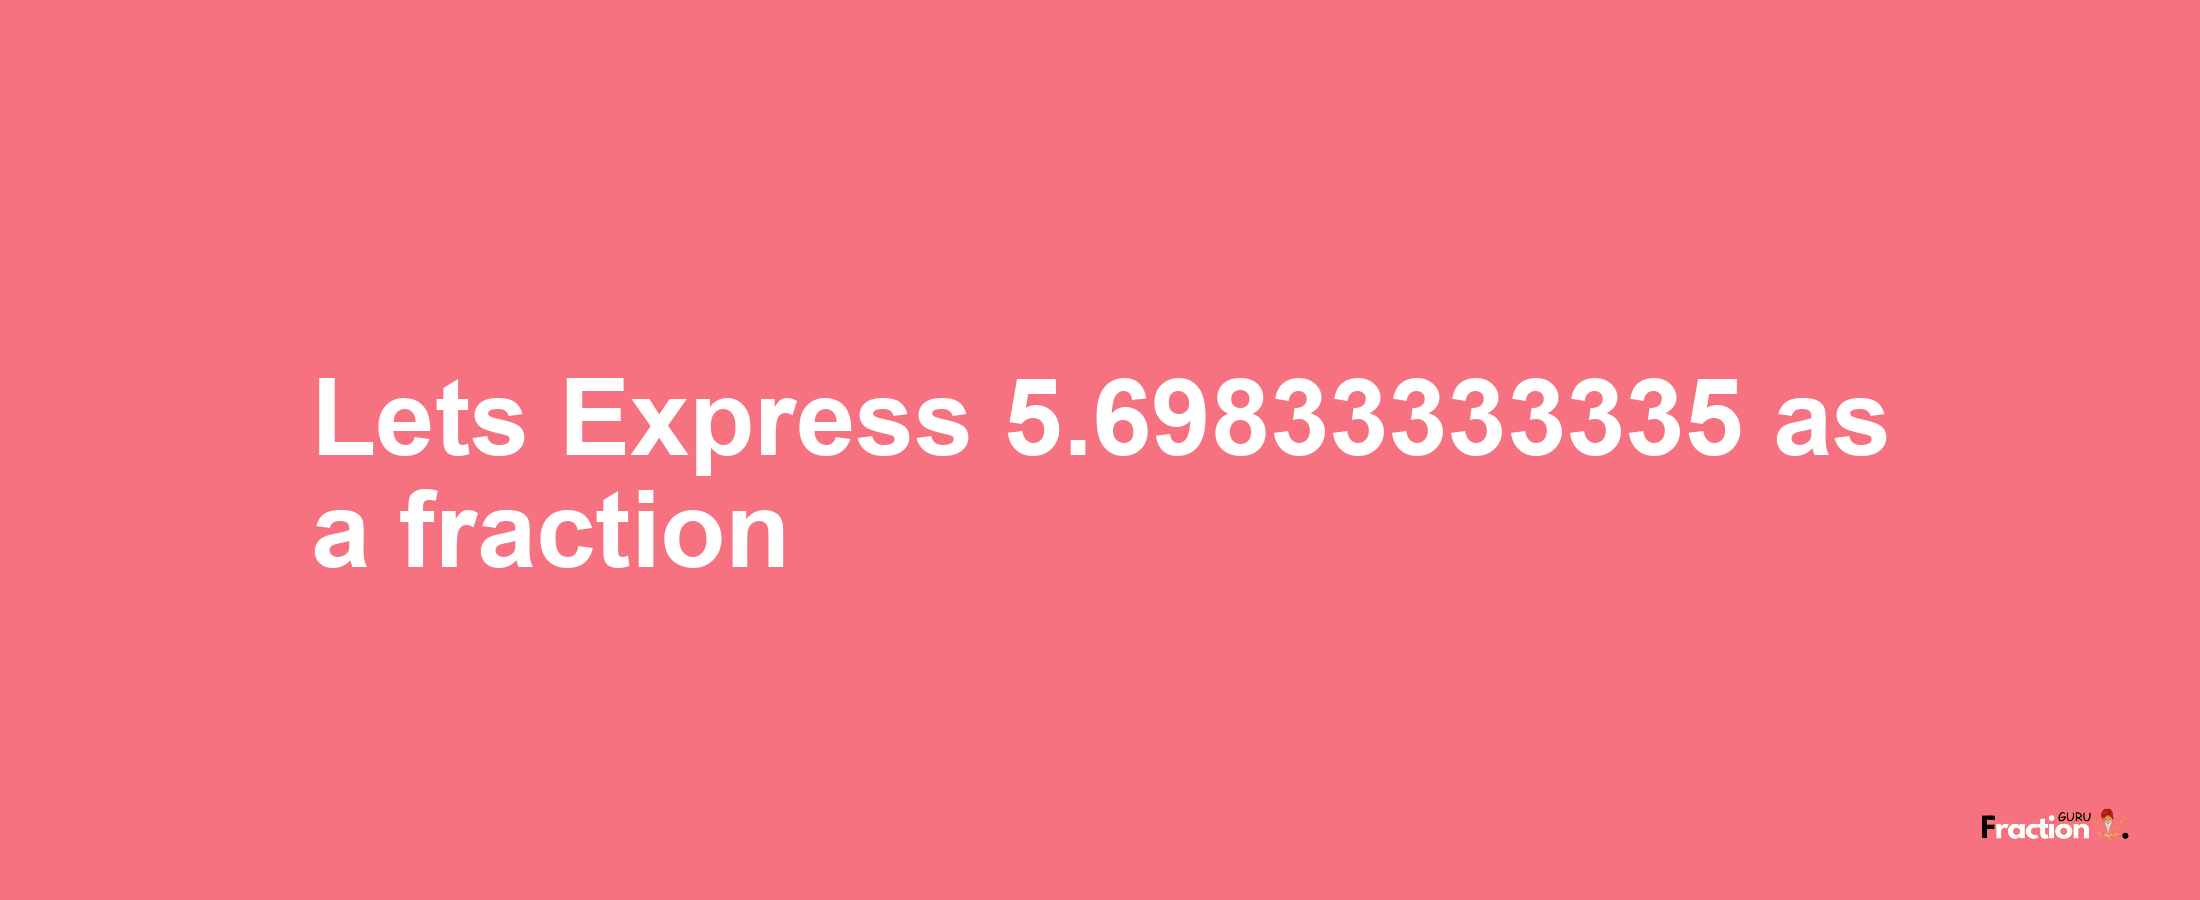 Lets Express 5.69833333335 as afraction